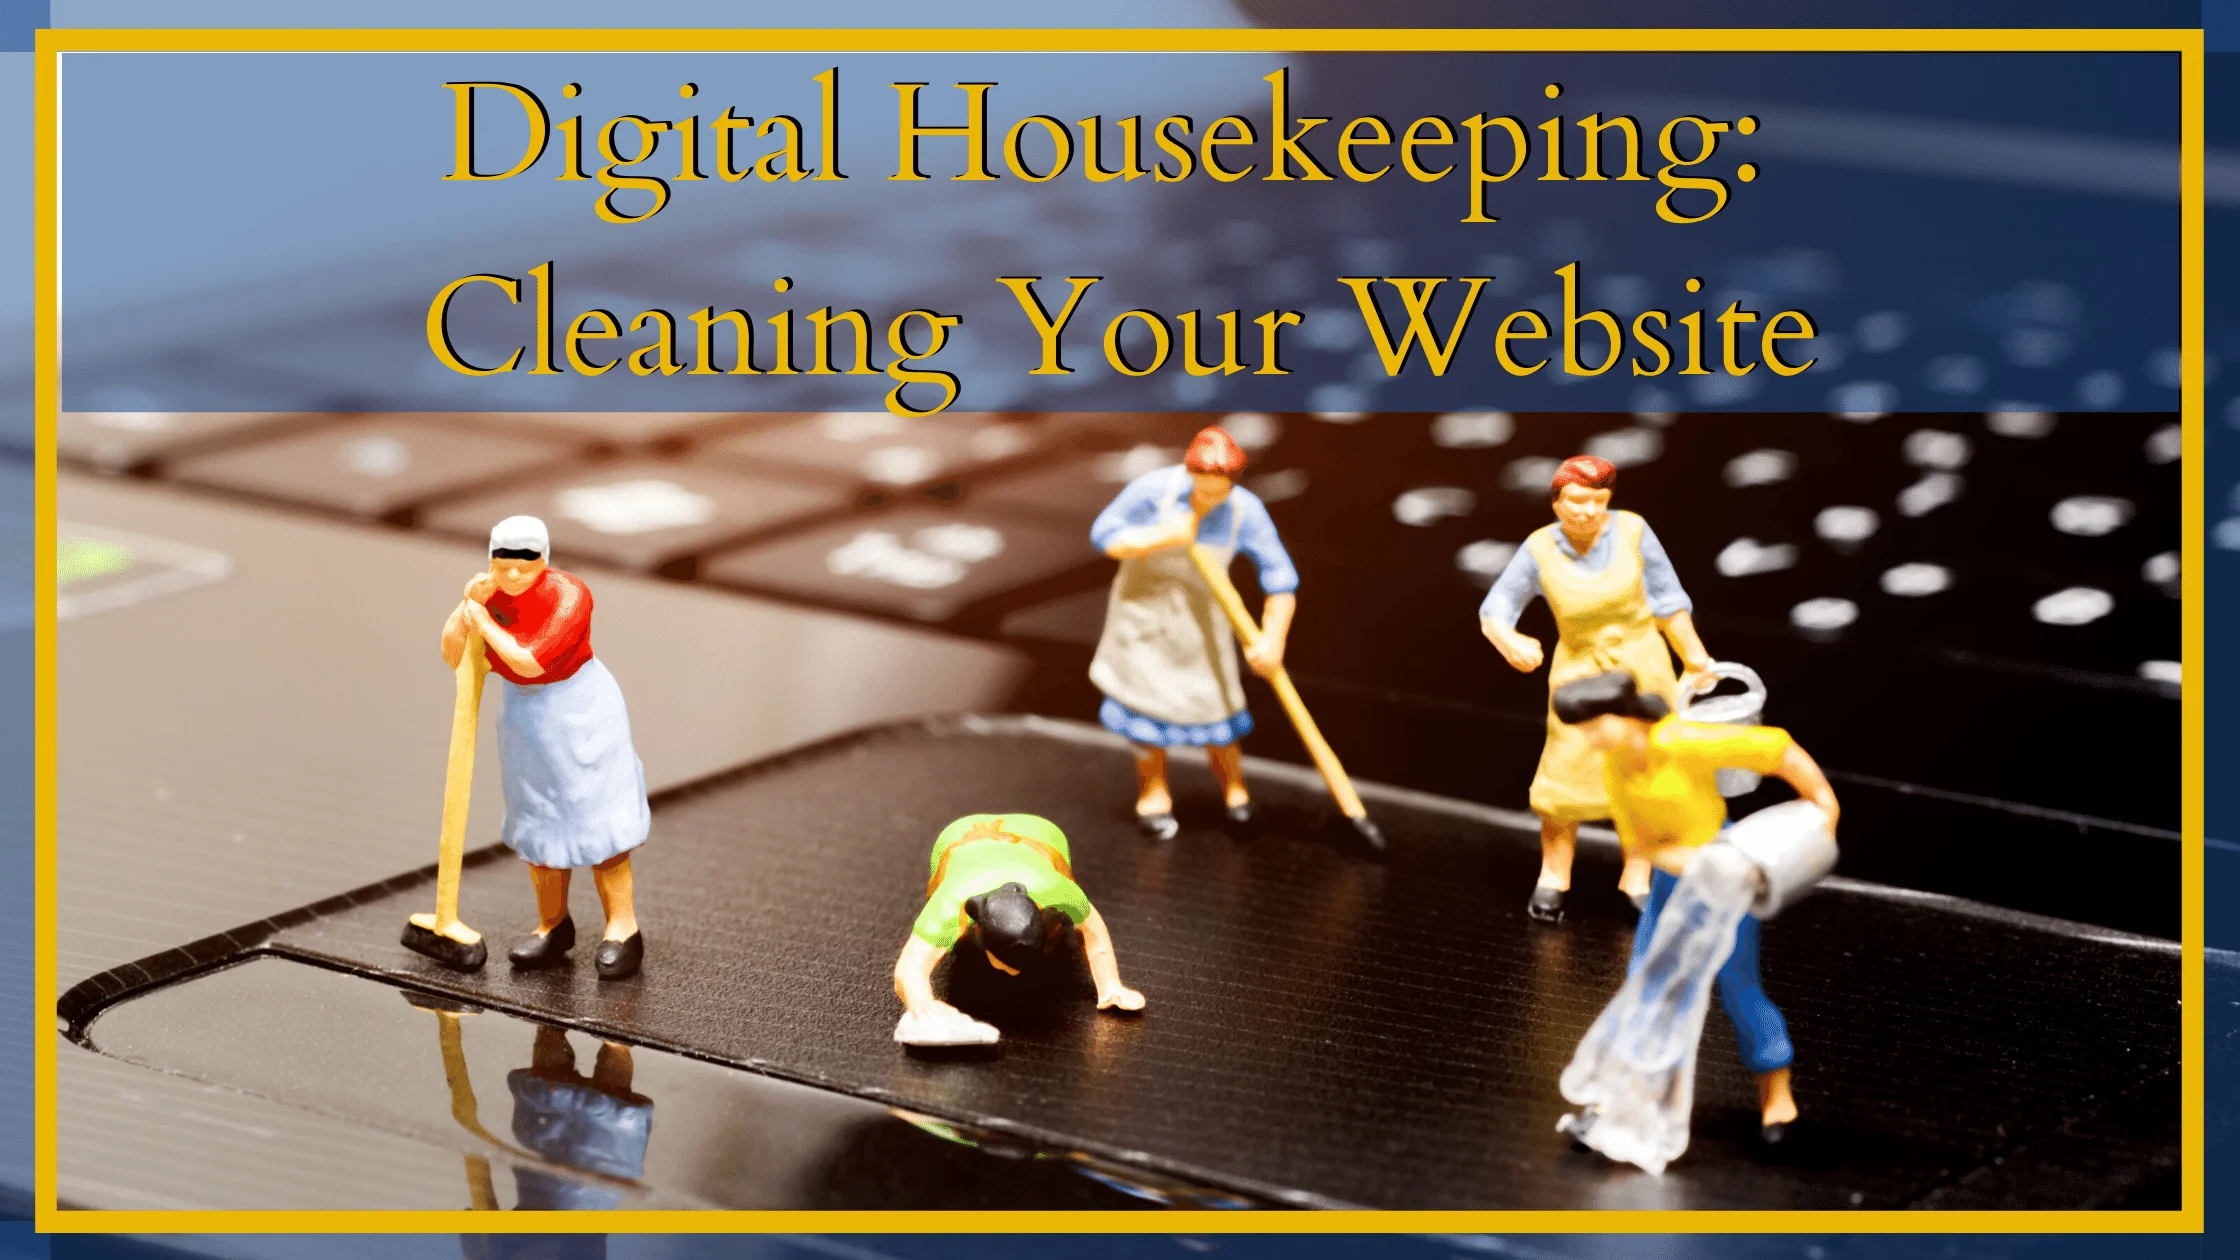 Digital Housekeeping and why it's important to update your website regularly.